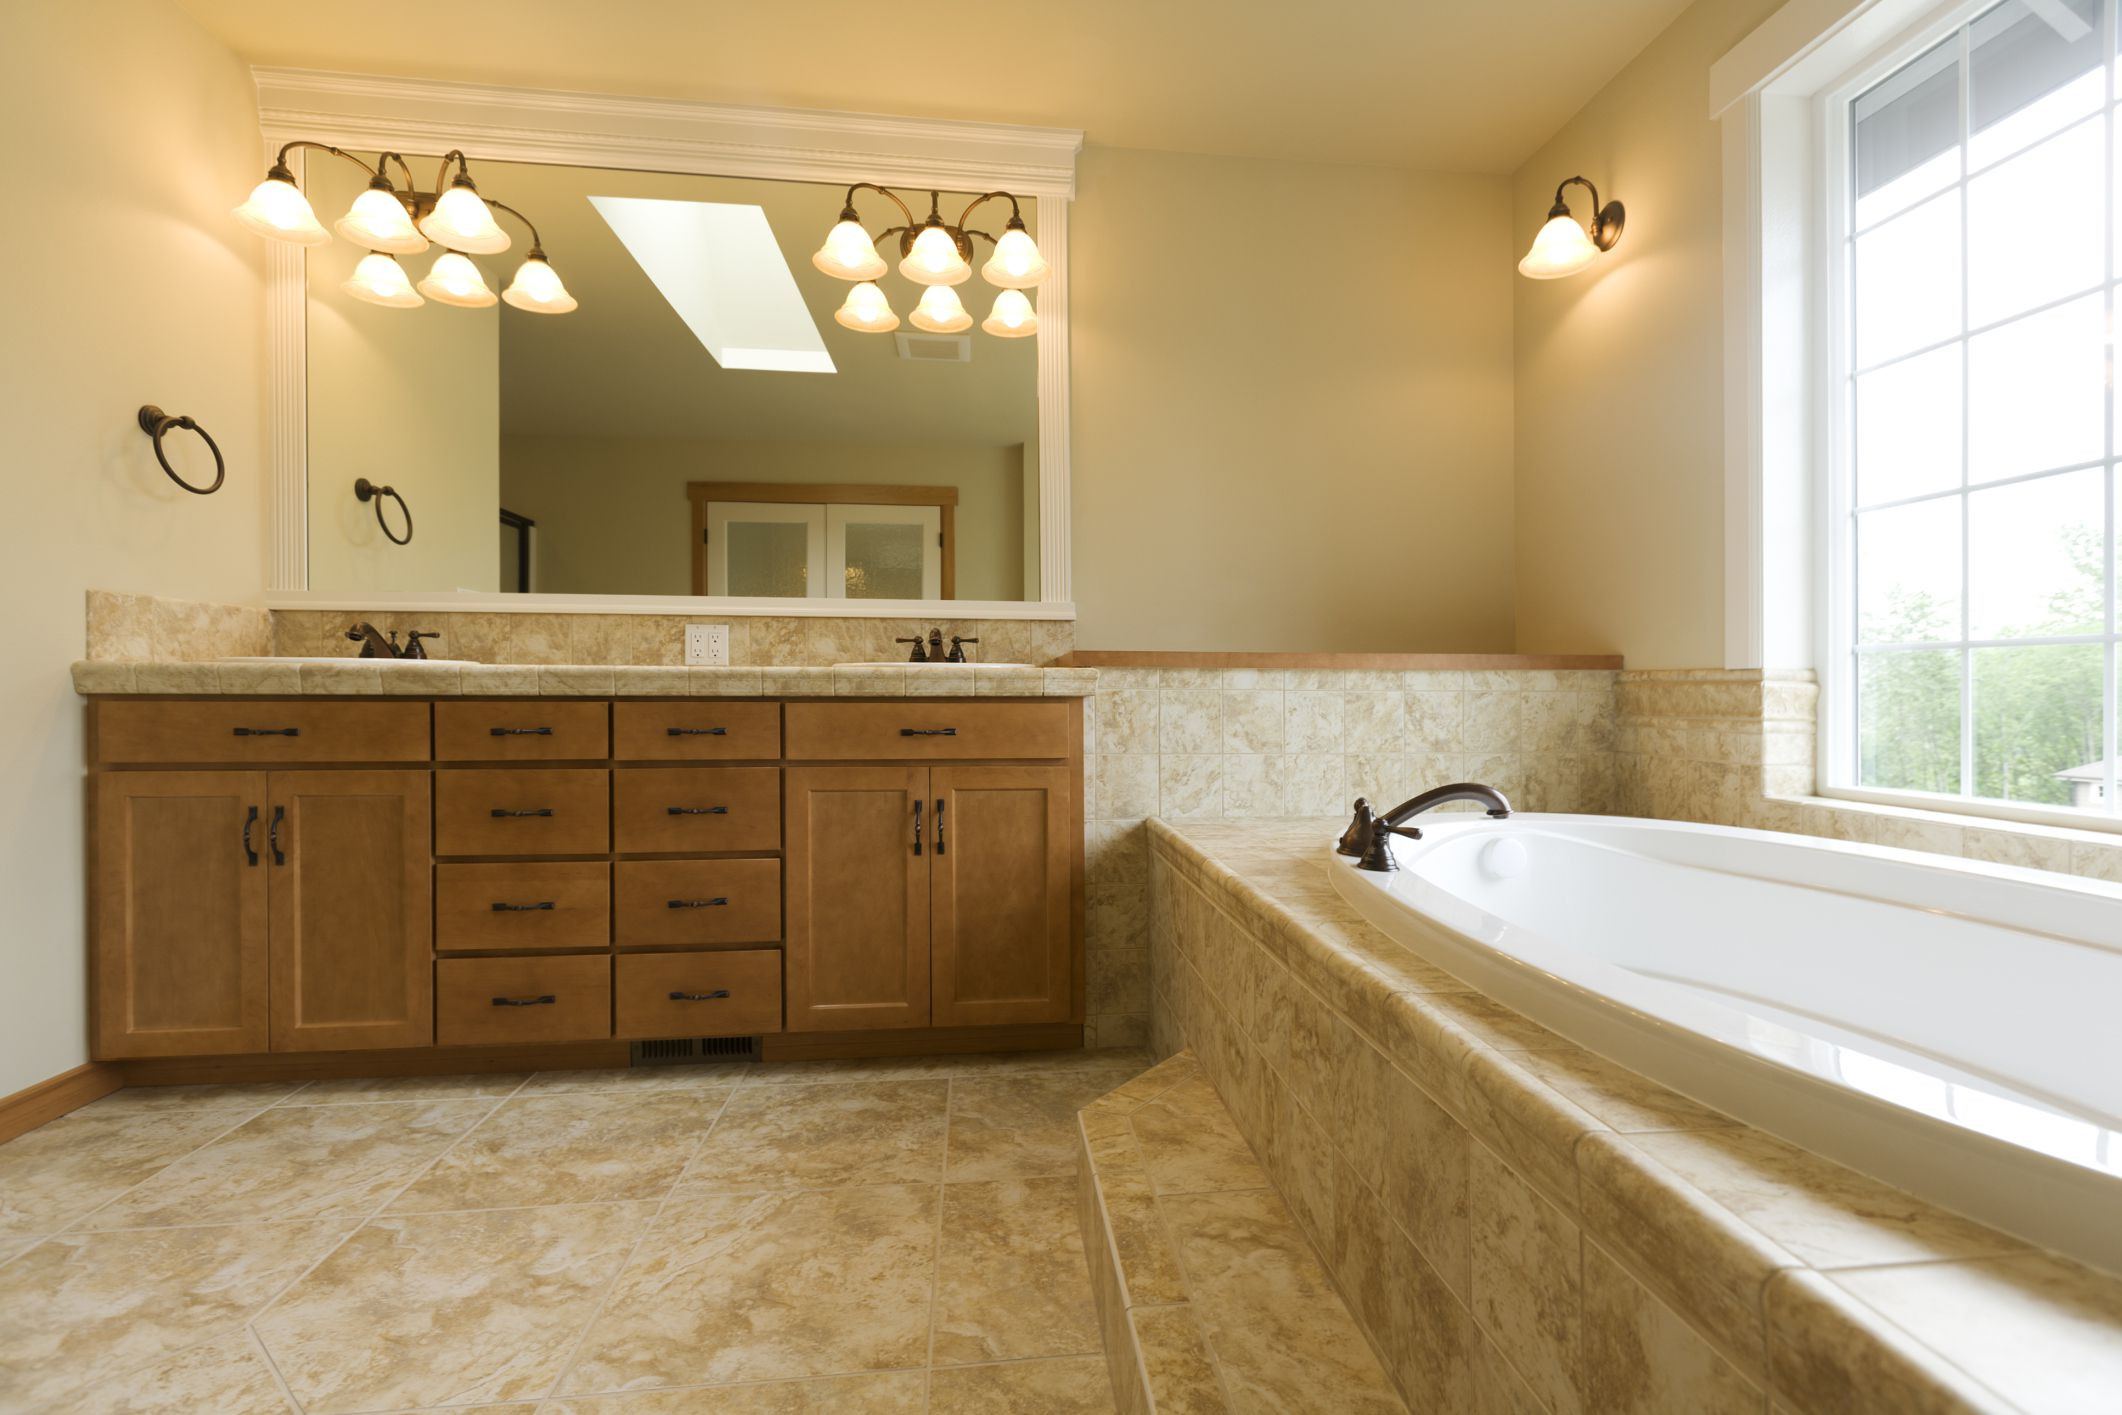 Installing A Bathroom Vanity
 How to Replace and Install a Bathroom Vanity and Sink